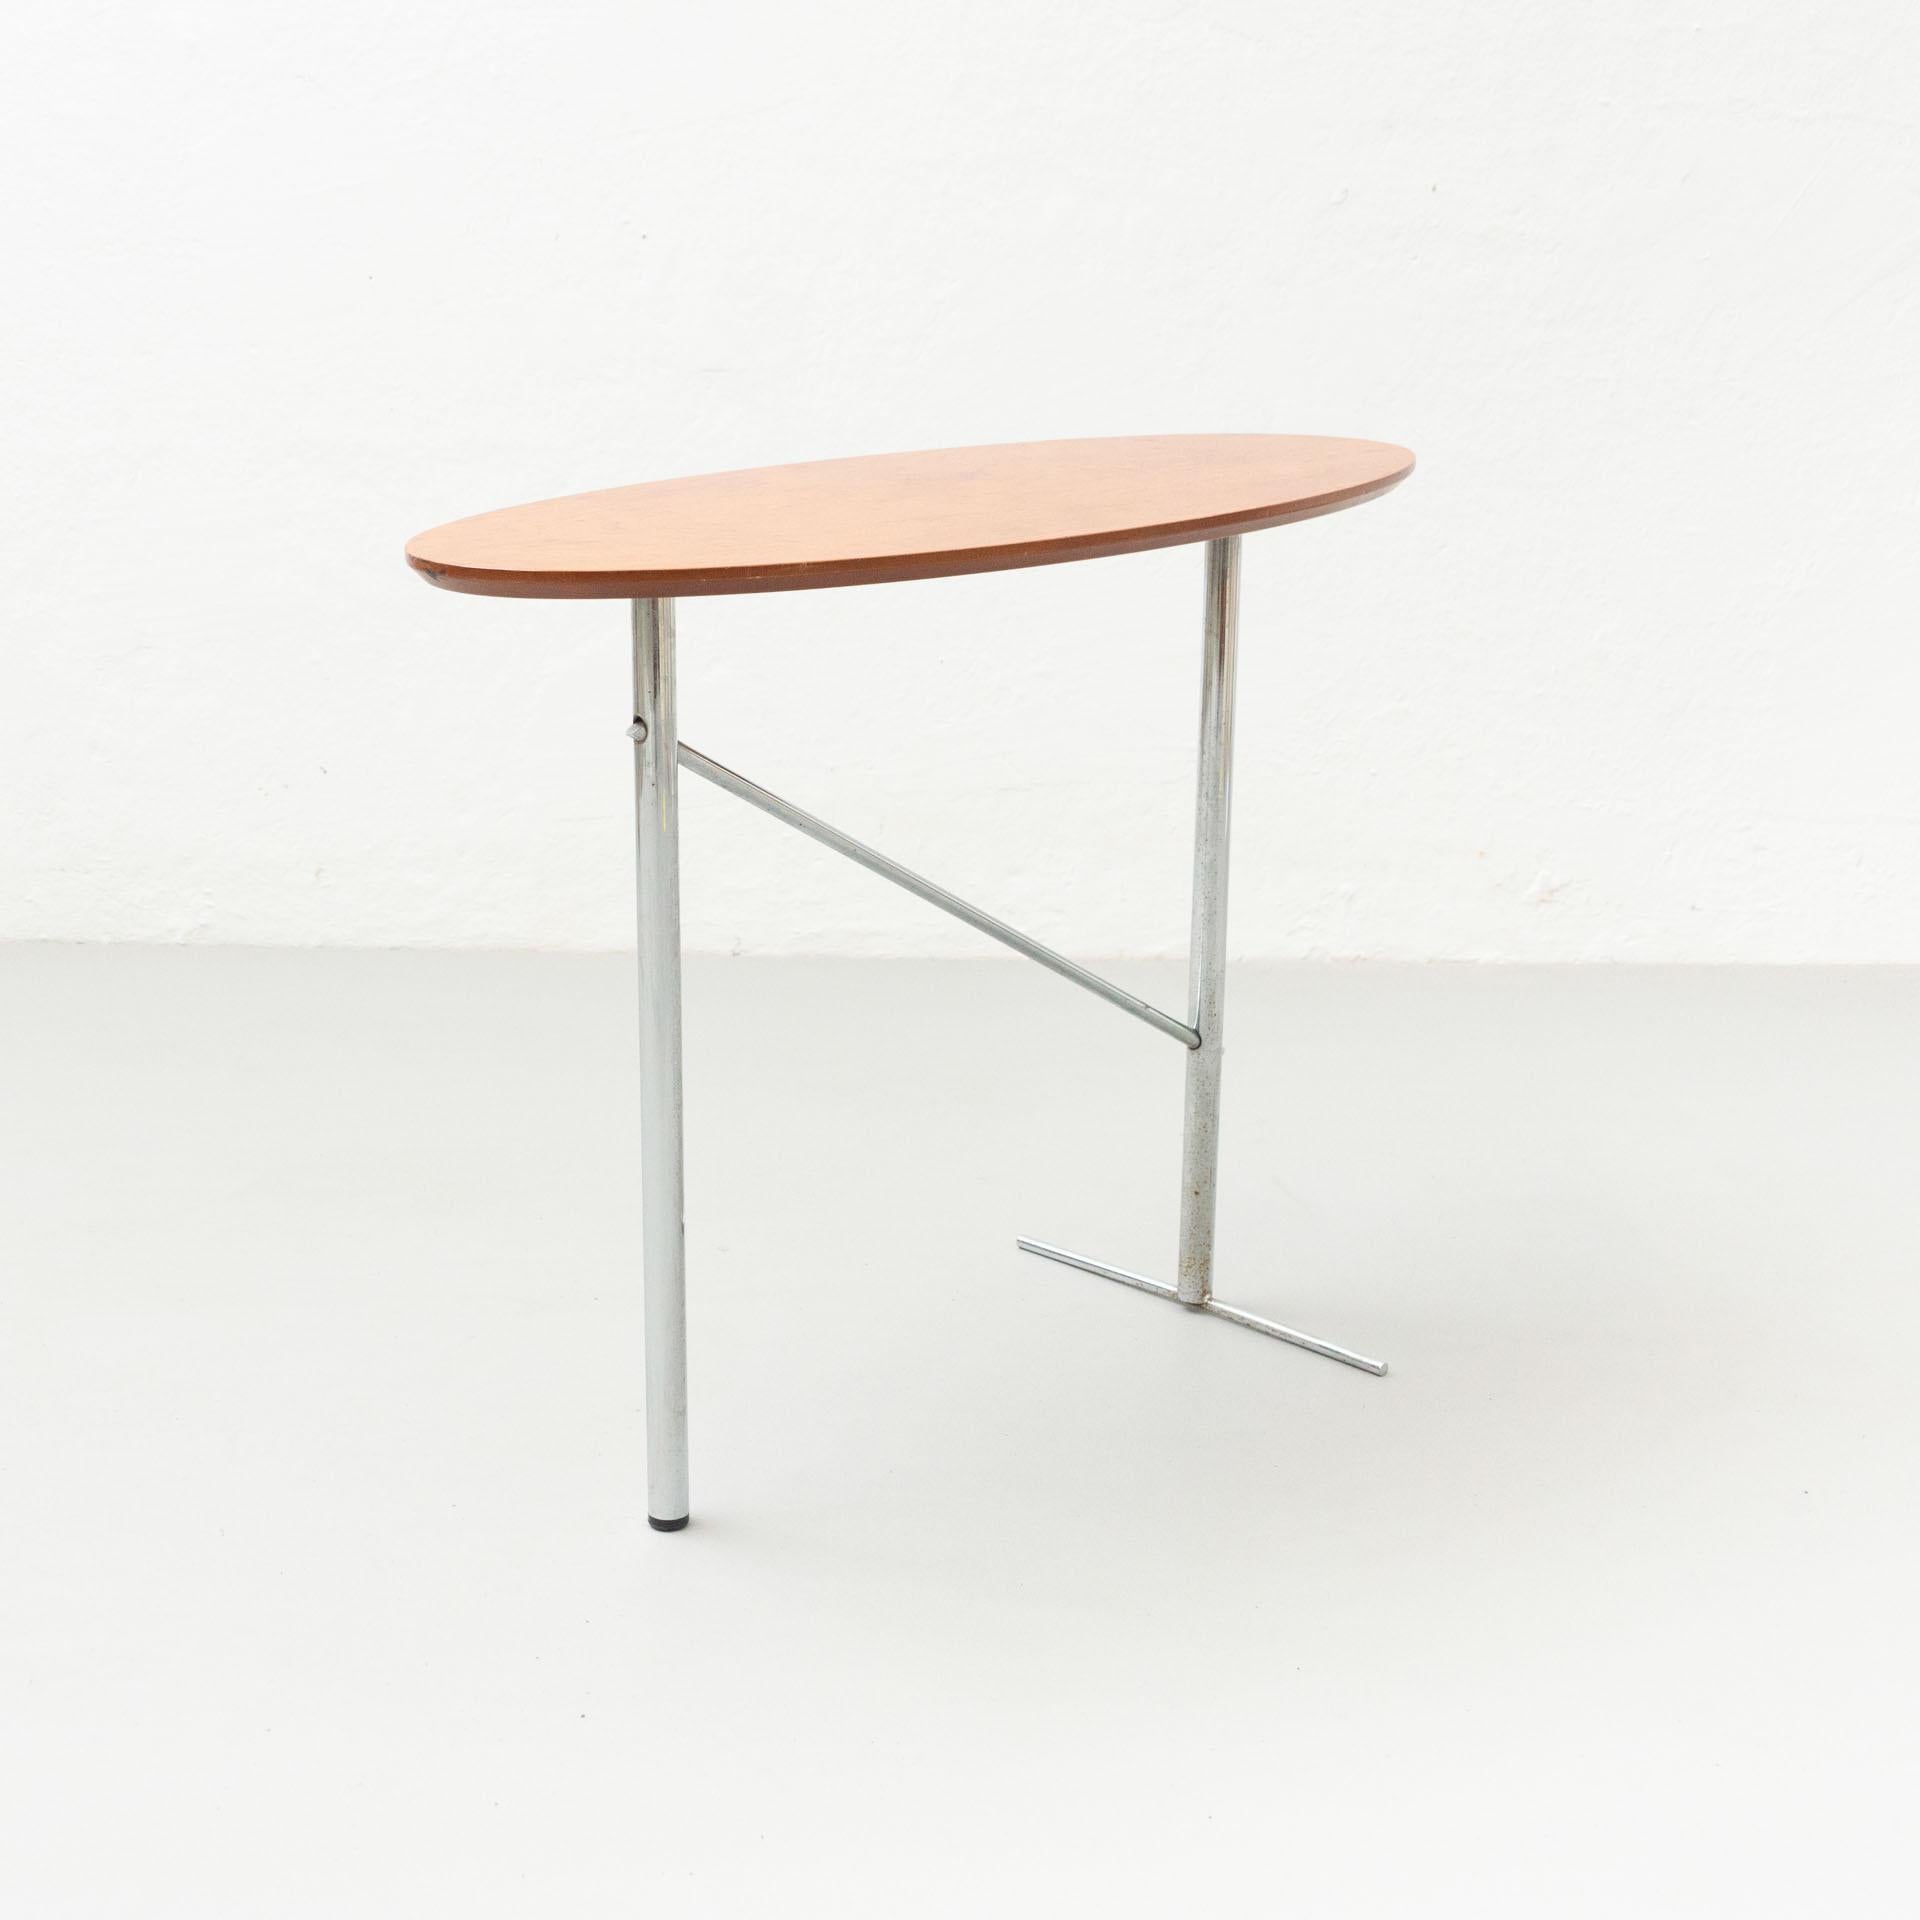 Side table designed by Mobles 114, circa 1980.
Founded in 1973, Mobles 114 is a company based in Barcelona that specializes in producing contemporary furniture and fittings. Their mission is to create products that improve the quality of public